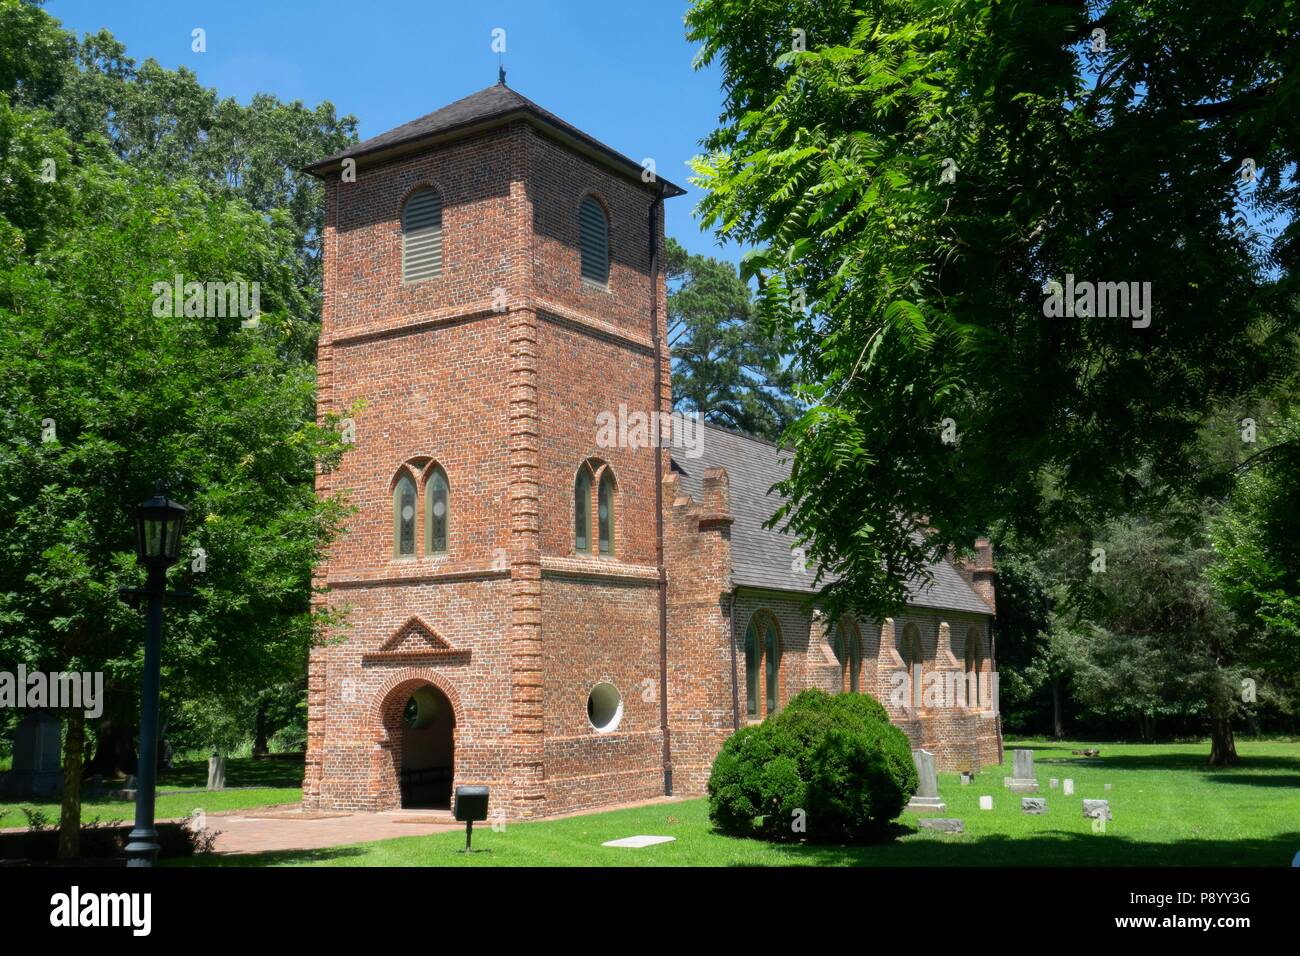 Restored St. Luke's church in Smithfield Virginia is a registered national historic landmark. The original congregation dates back to 1629. The church was Originally constructed in 1682 Stock Photo